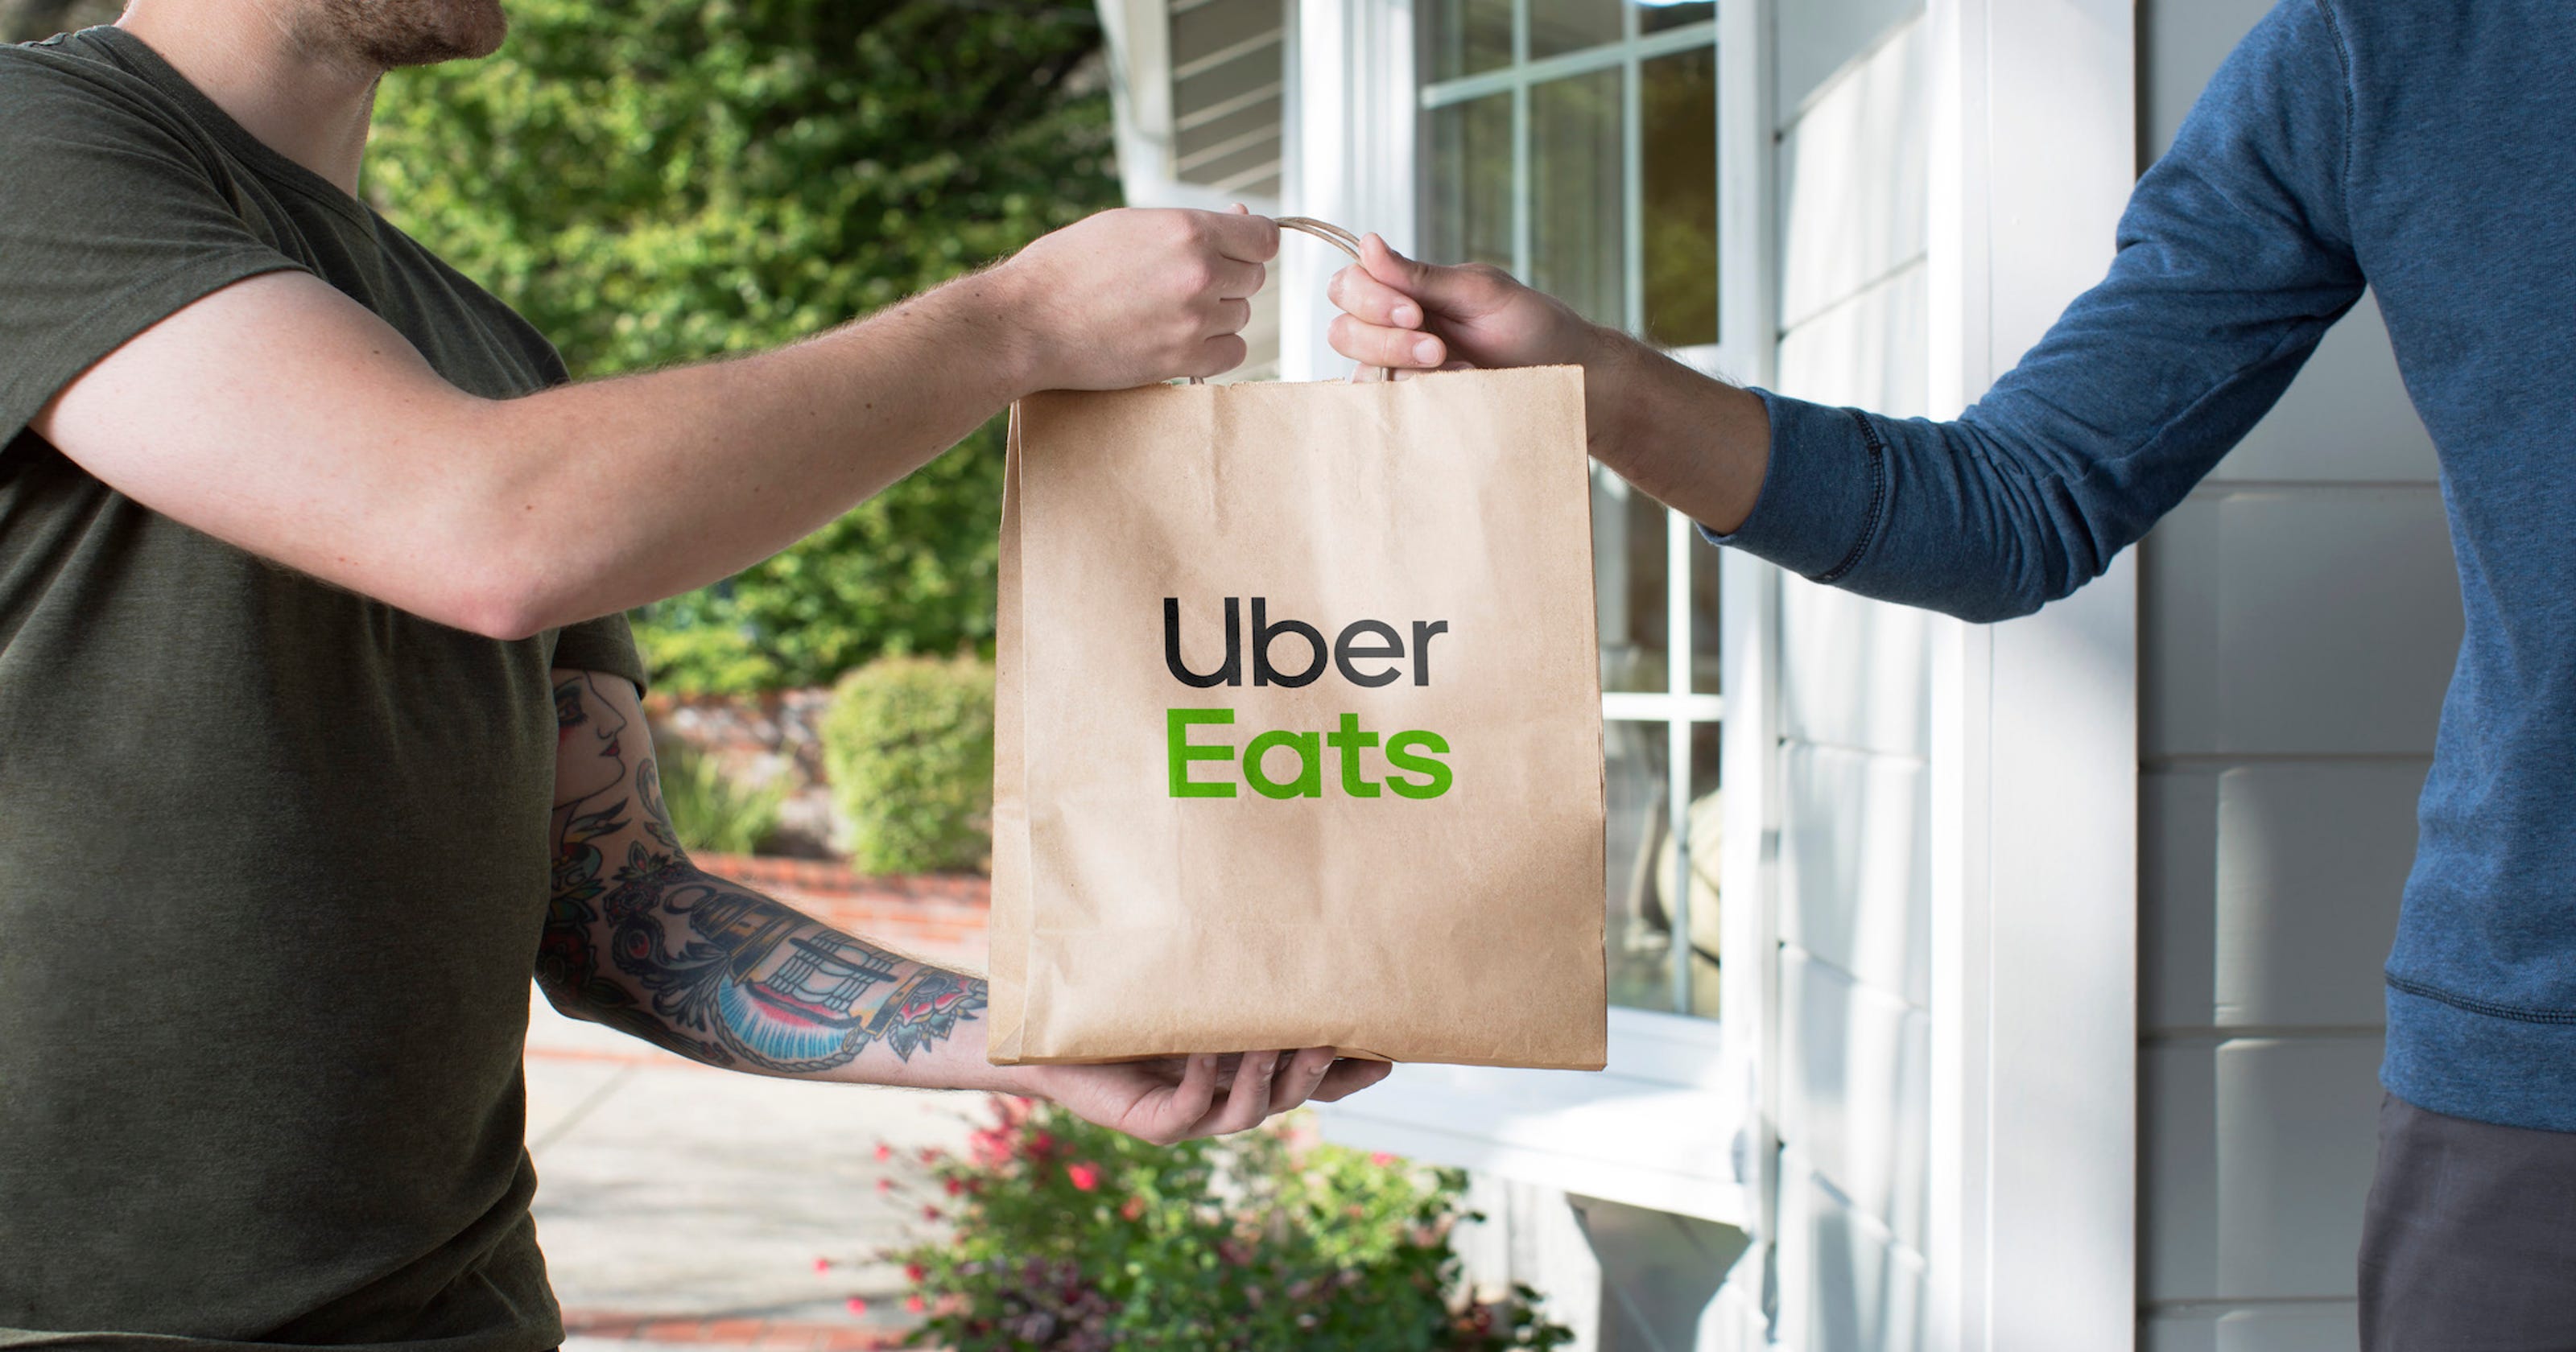 Delivery: Uber Eats shares weird things we crave and what it tells us